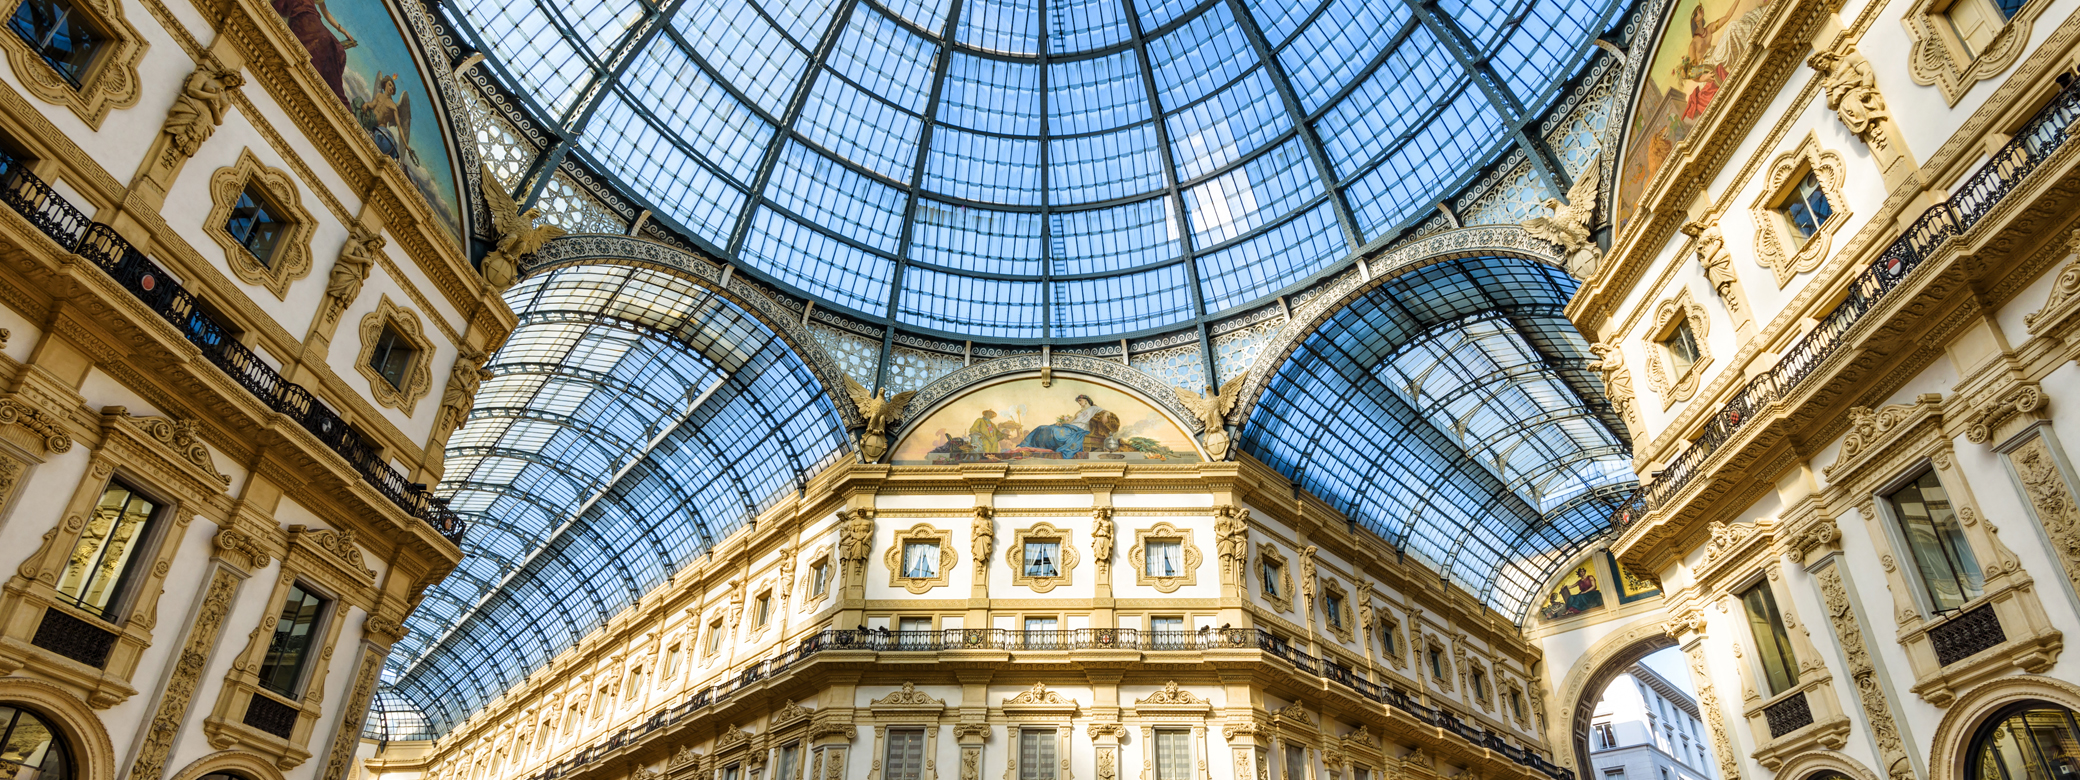 The glass roof of the Galleria in Milan, Italy.